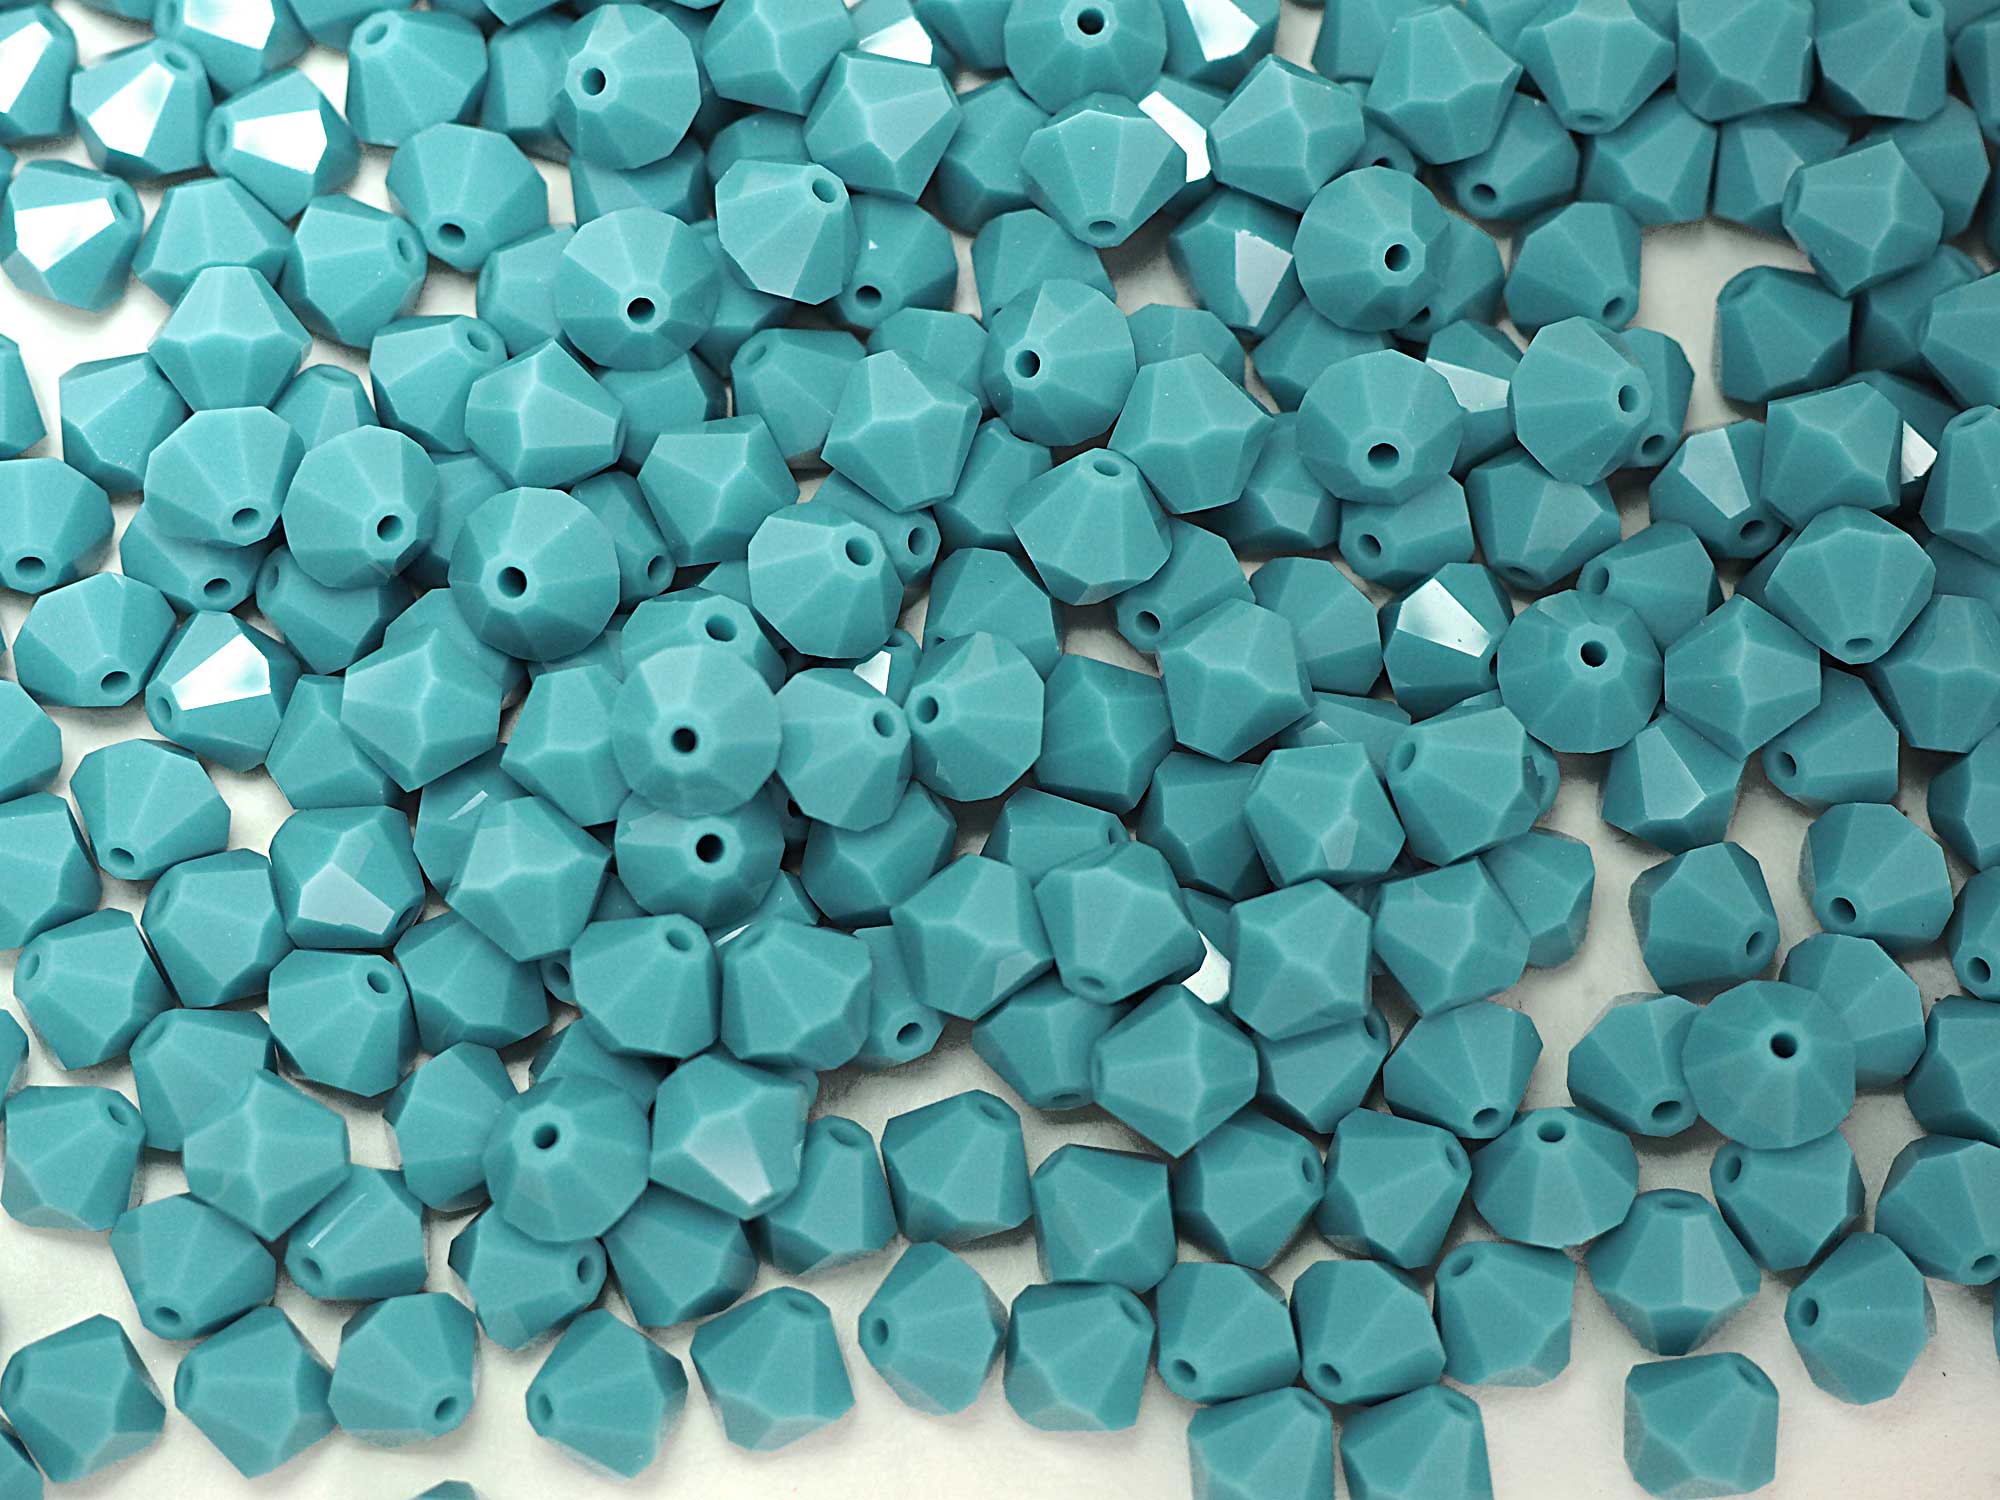 Turquoise (Preciosa color), Czech Glass Beads, Machine Cut Bicones (MC -  Crystals and Beads for Friends